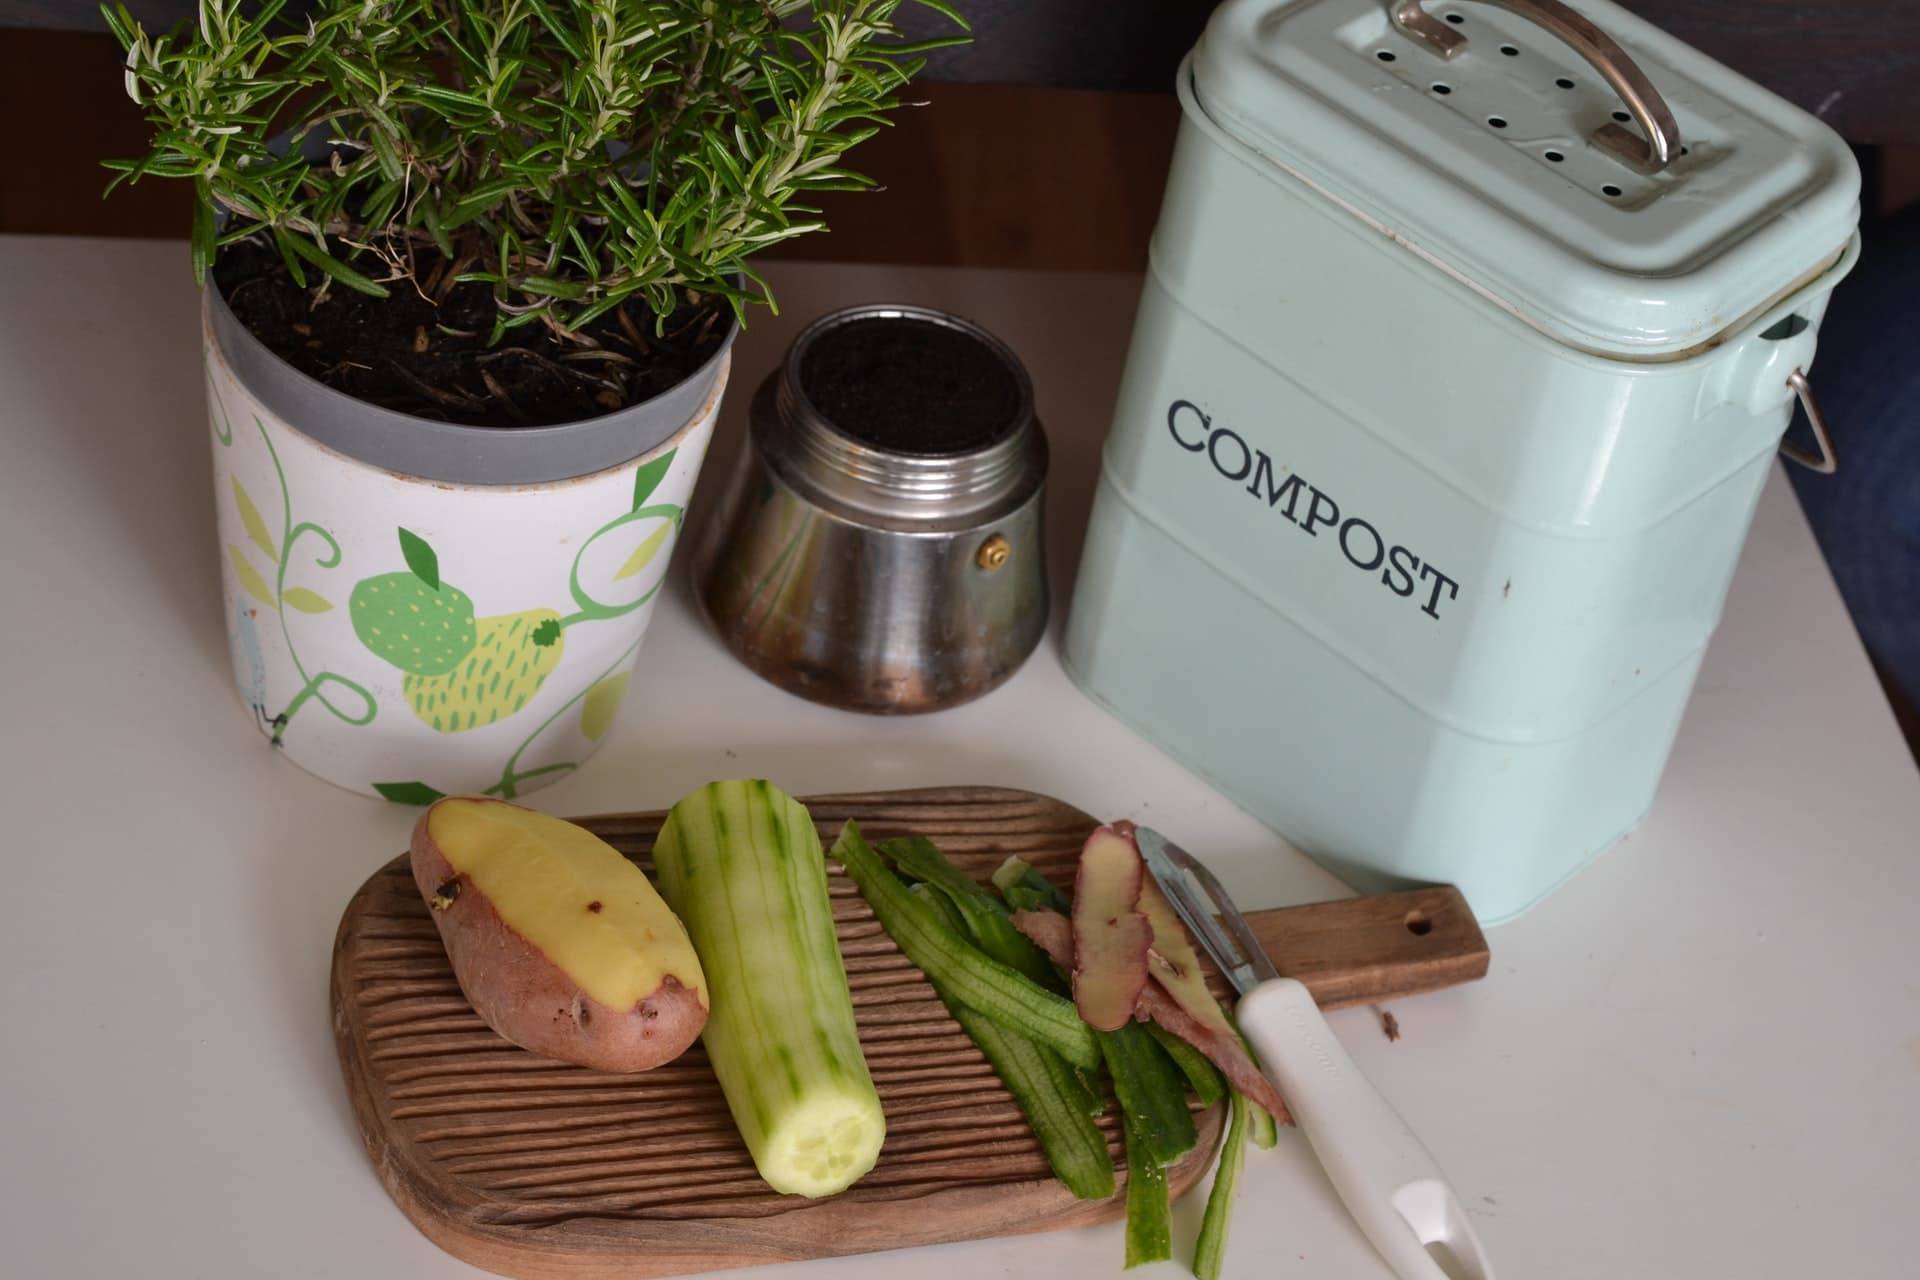 how to compost at home